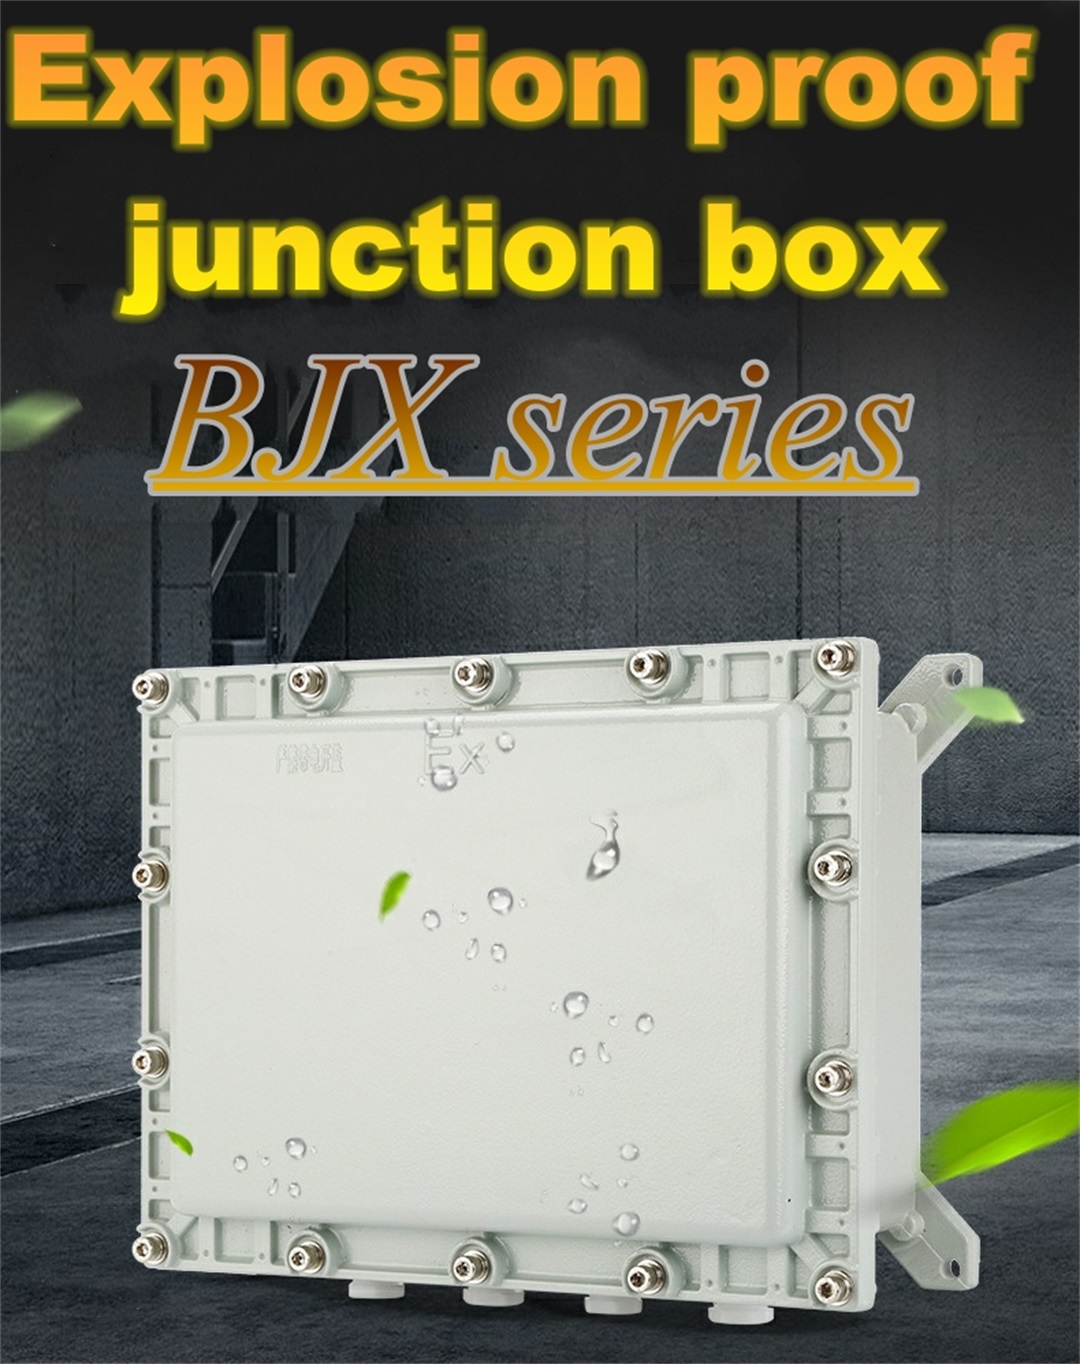 Explosion proof junction box